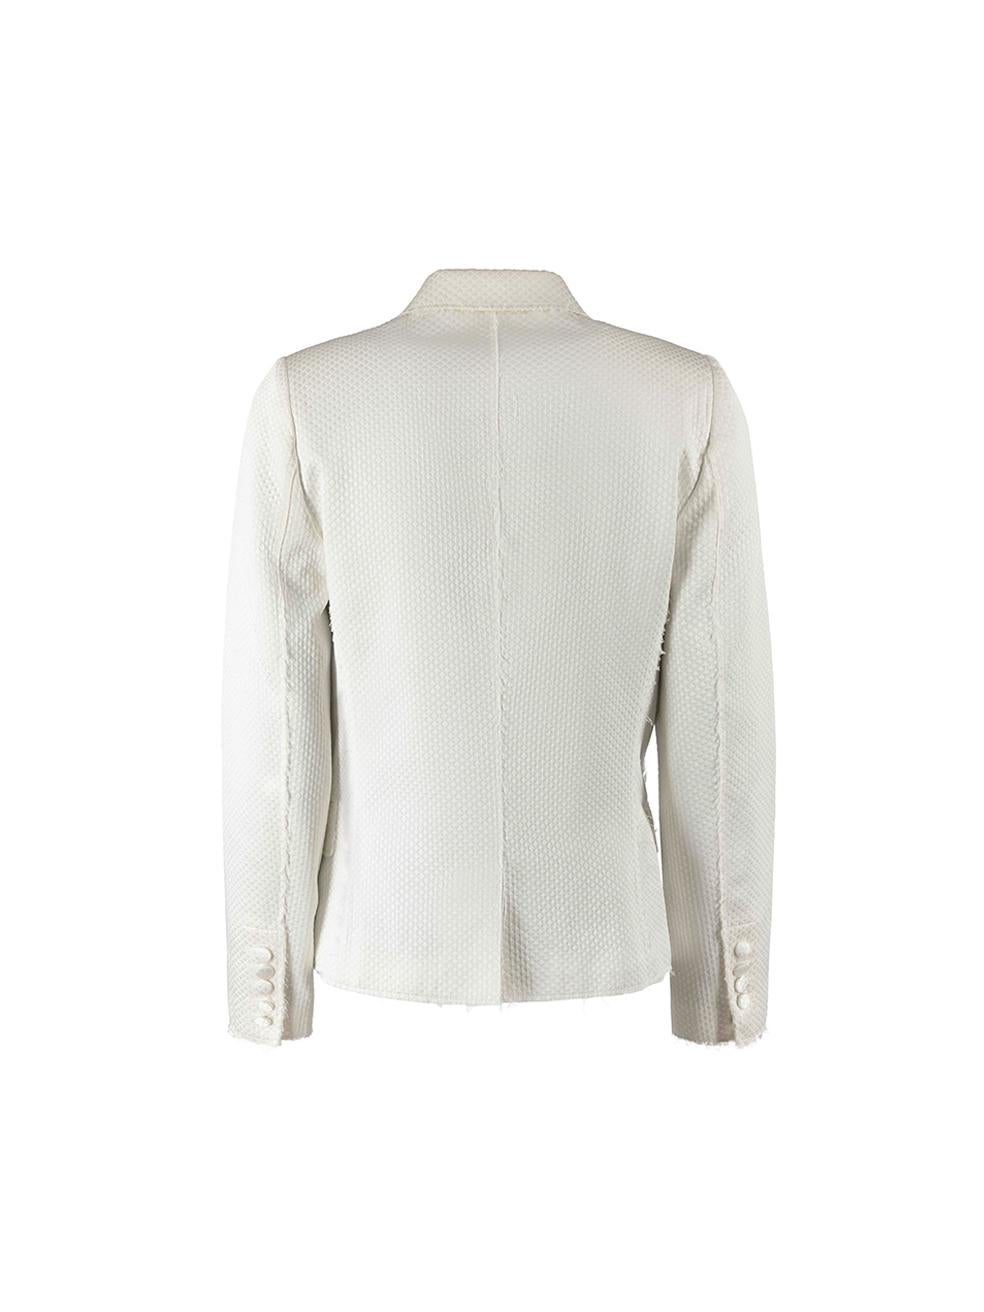 Zadig & Voltaire Deluxe White Diamond Jacquard Frayed Hem Blazer Size S In Good Condition For Sale In London, GB